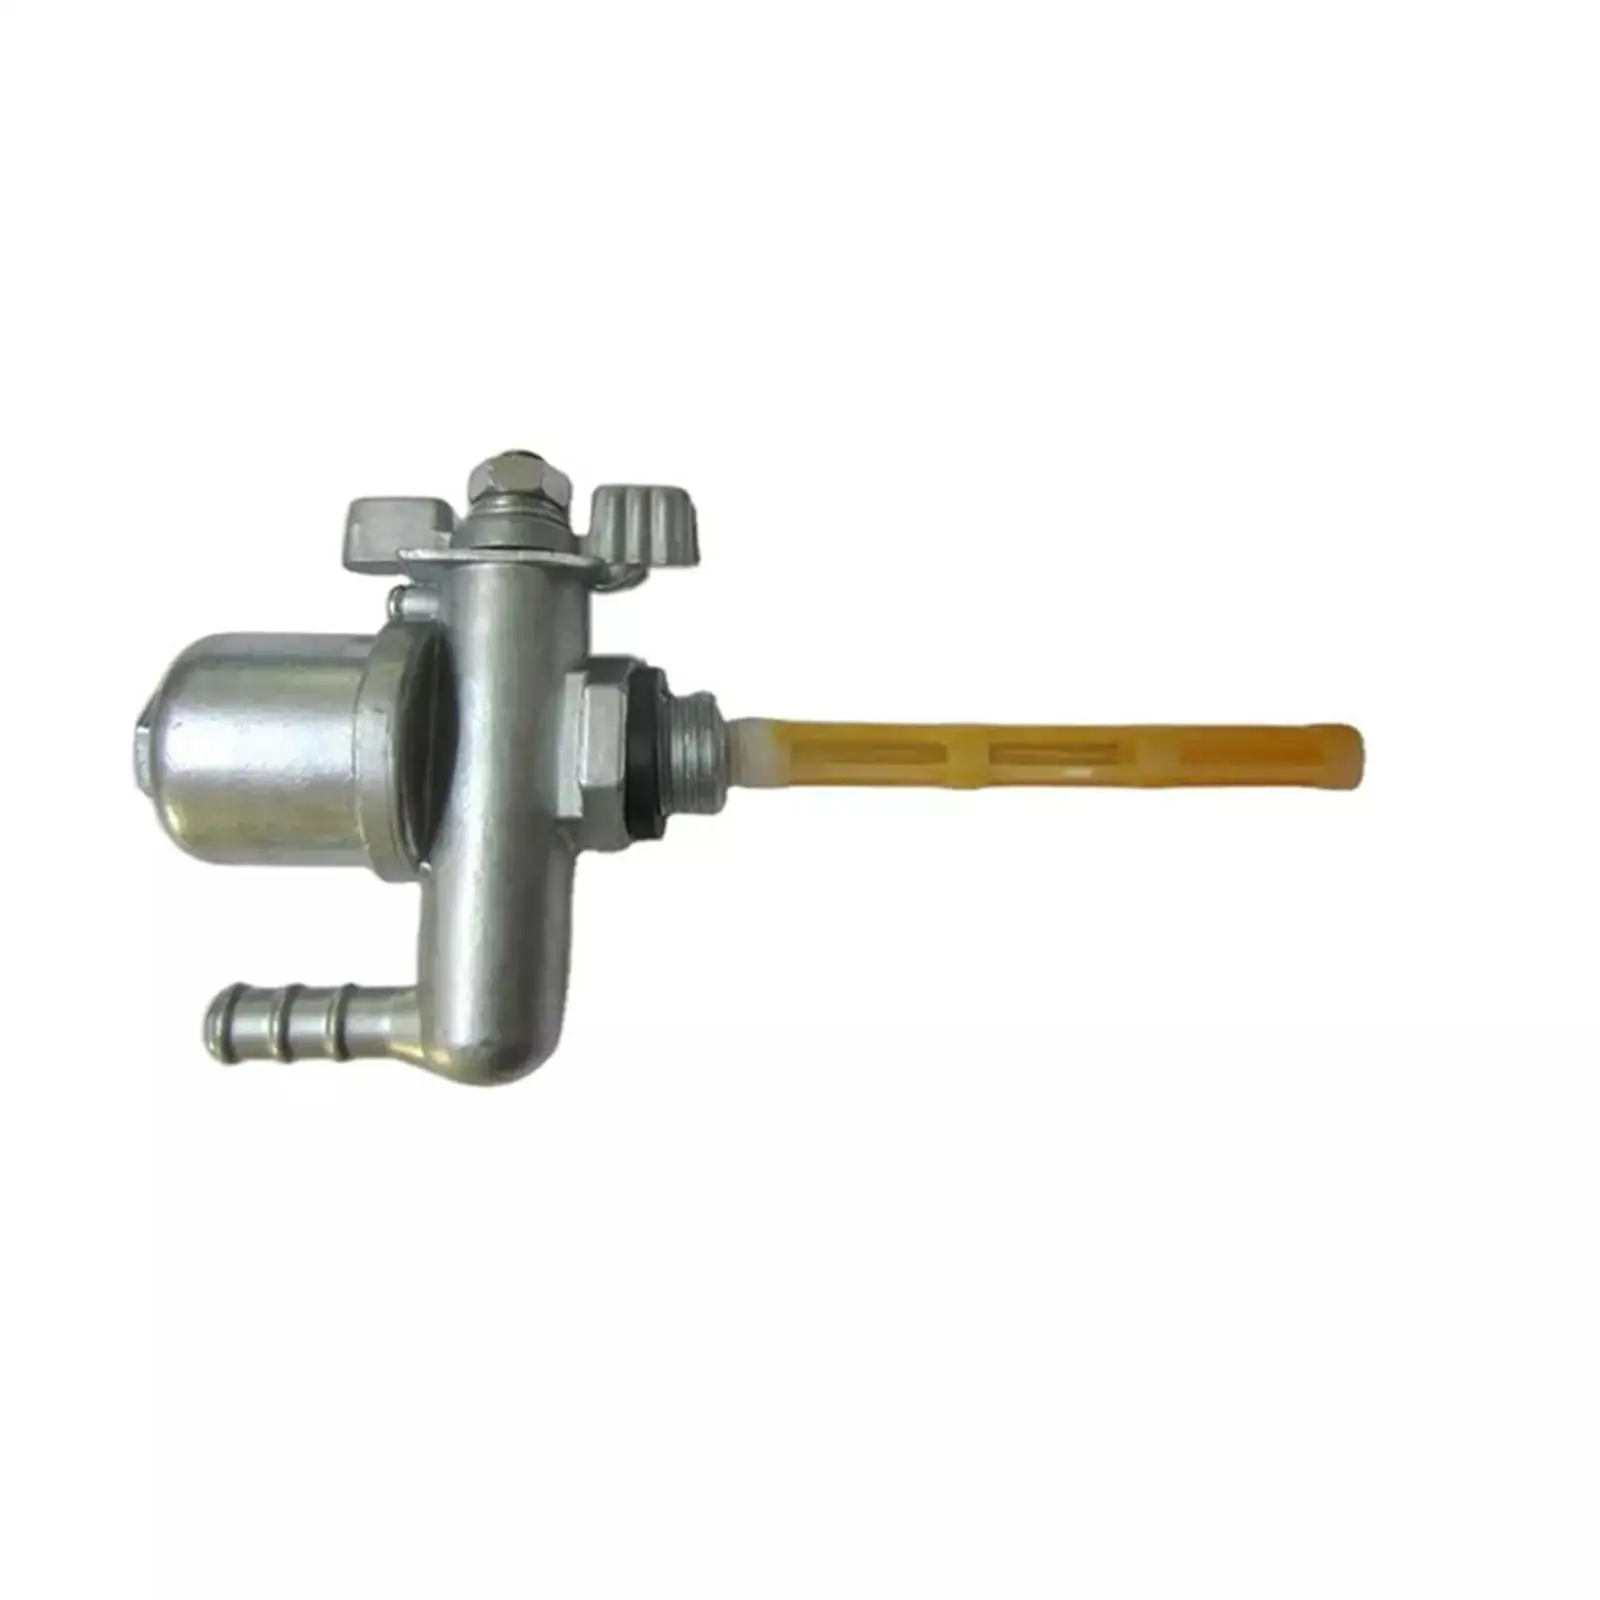 Motorcycle Gas Fuel Switch Pump Valve Petcock Replace for Ruassia Msk Motorcycle